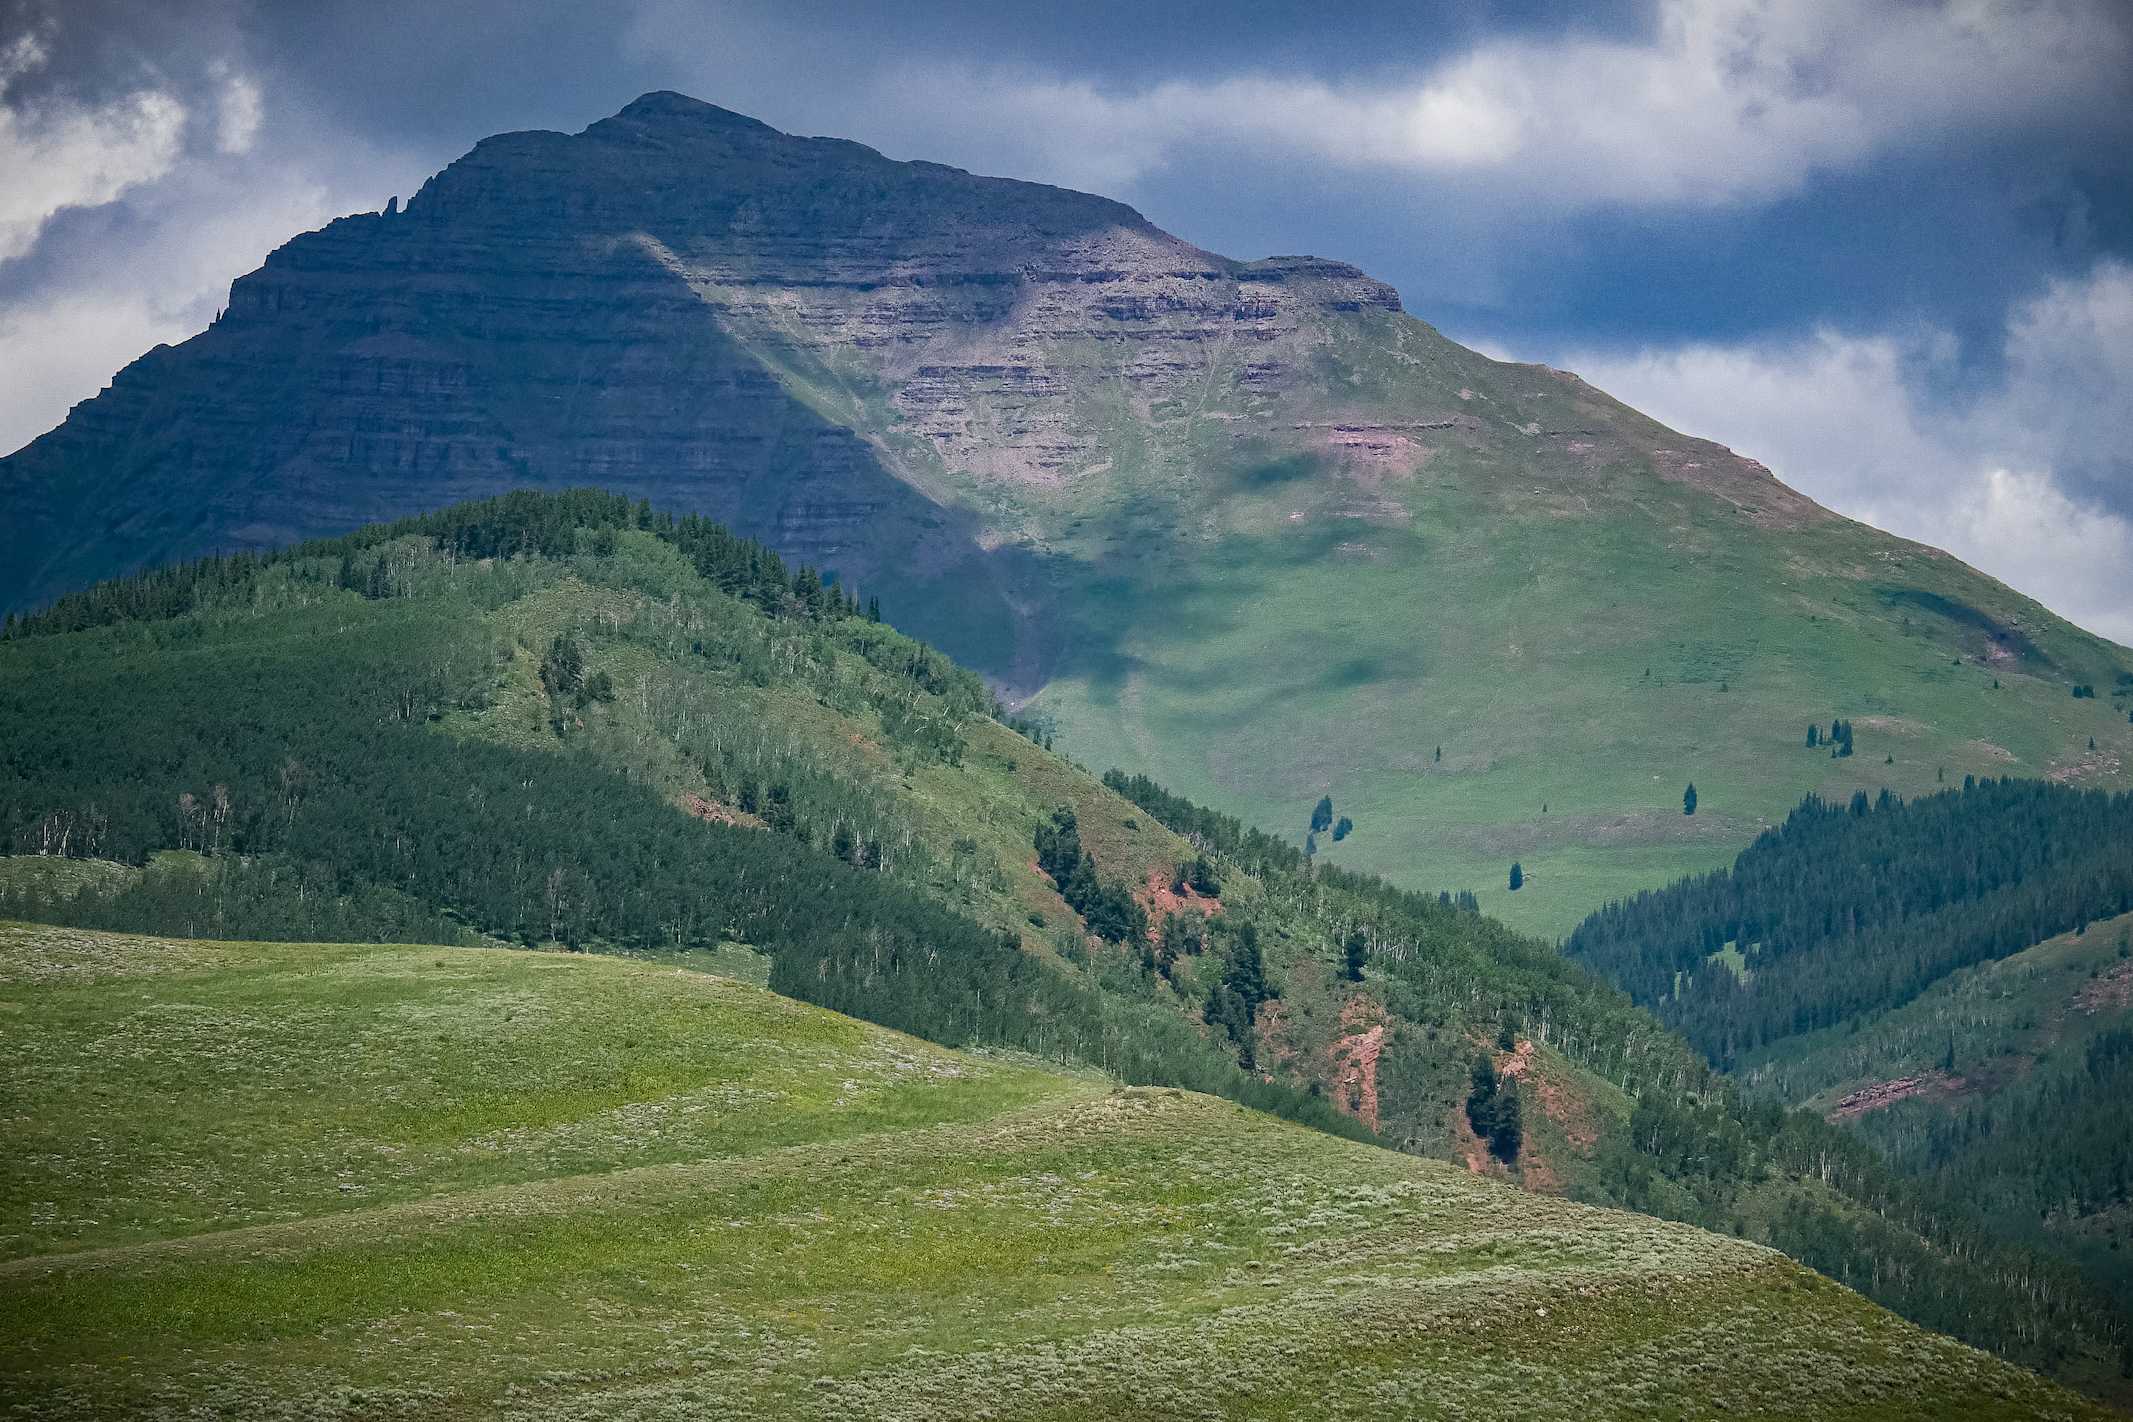 A pyramidal mountain called Teocalli Mountain in Crested Butte